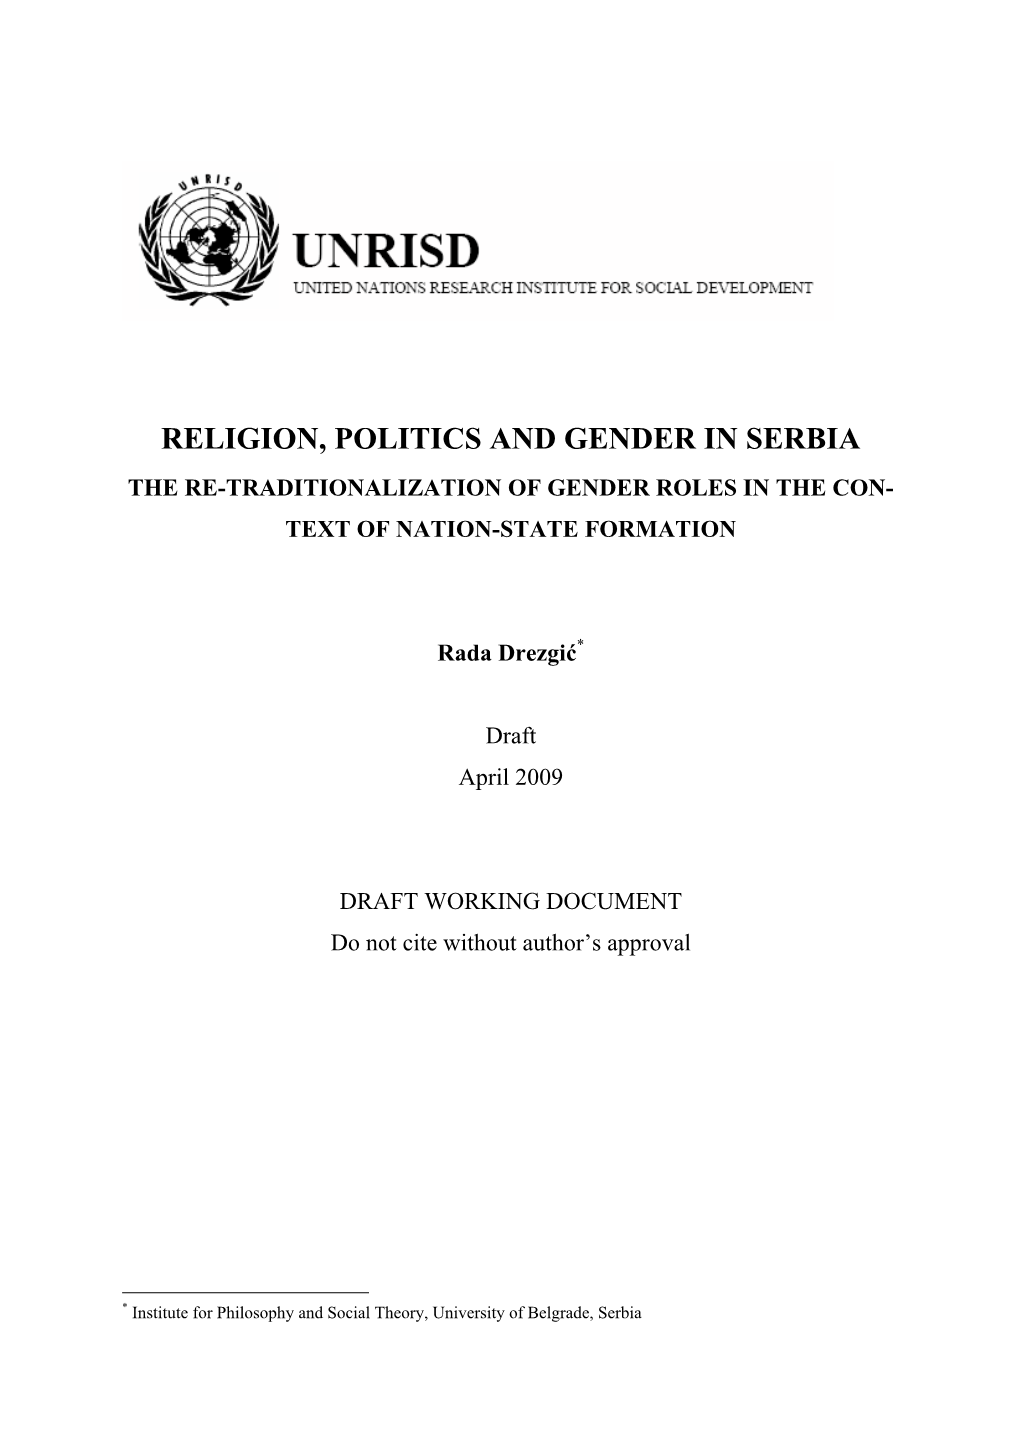 Religion, Politics and Gender in Serbia the Re-Traditionalization of Gender Roles in the Con- Text of Nation-State Formation